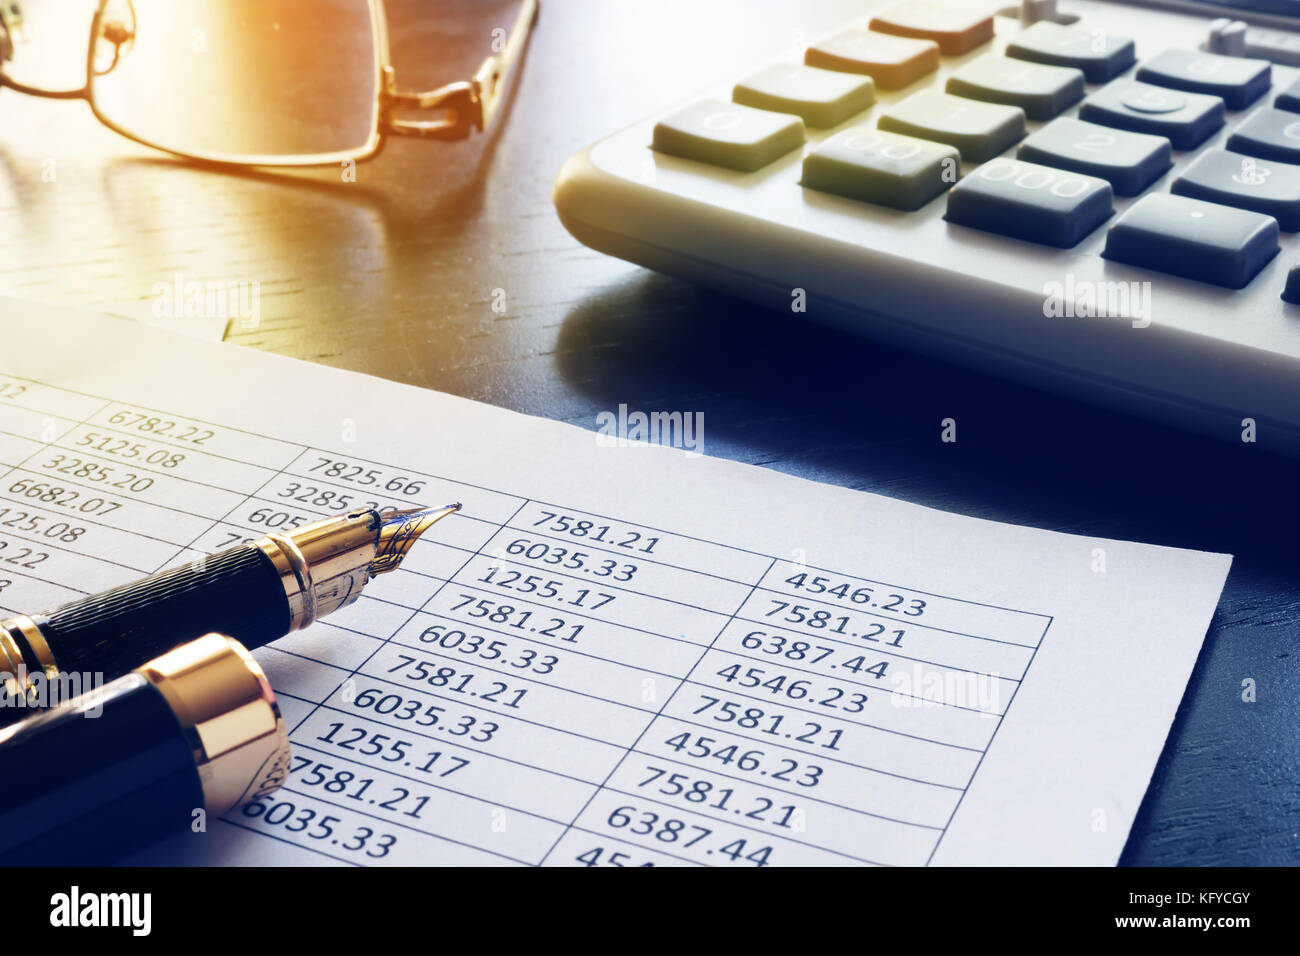 Office table with business report and financial documents. Stock Photo